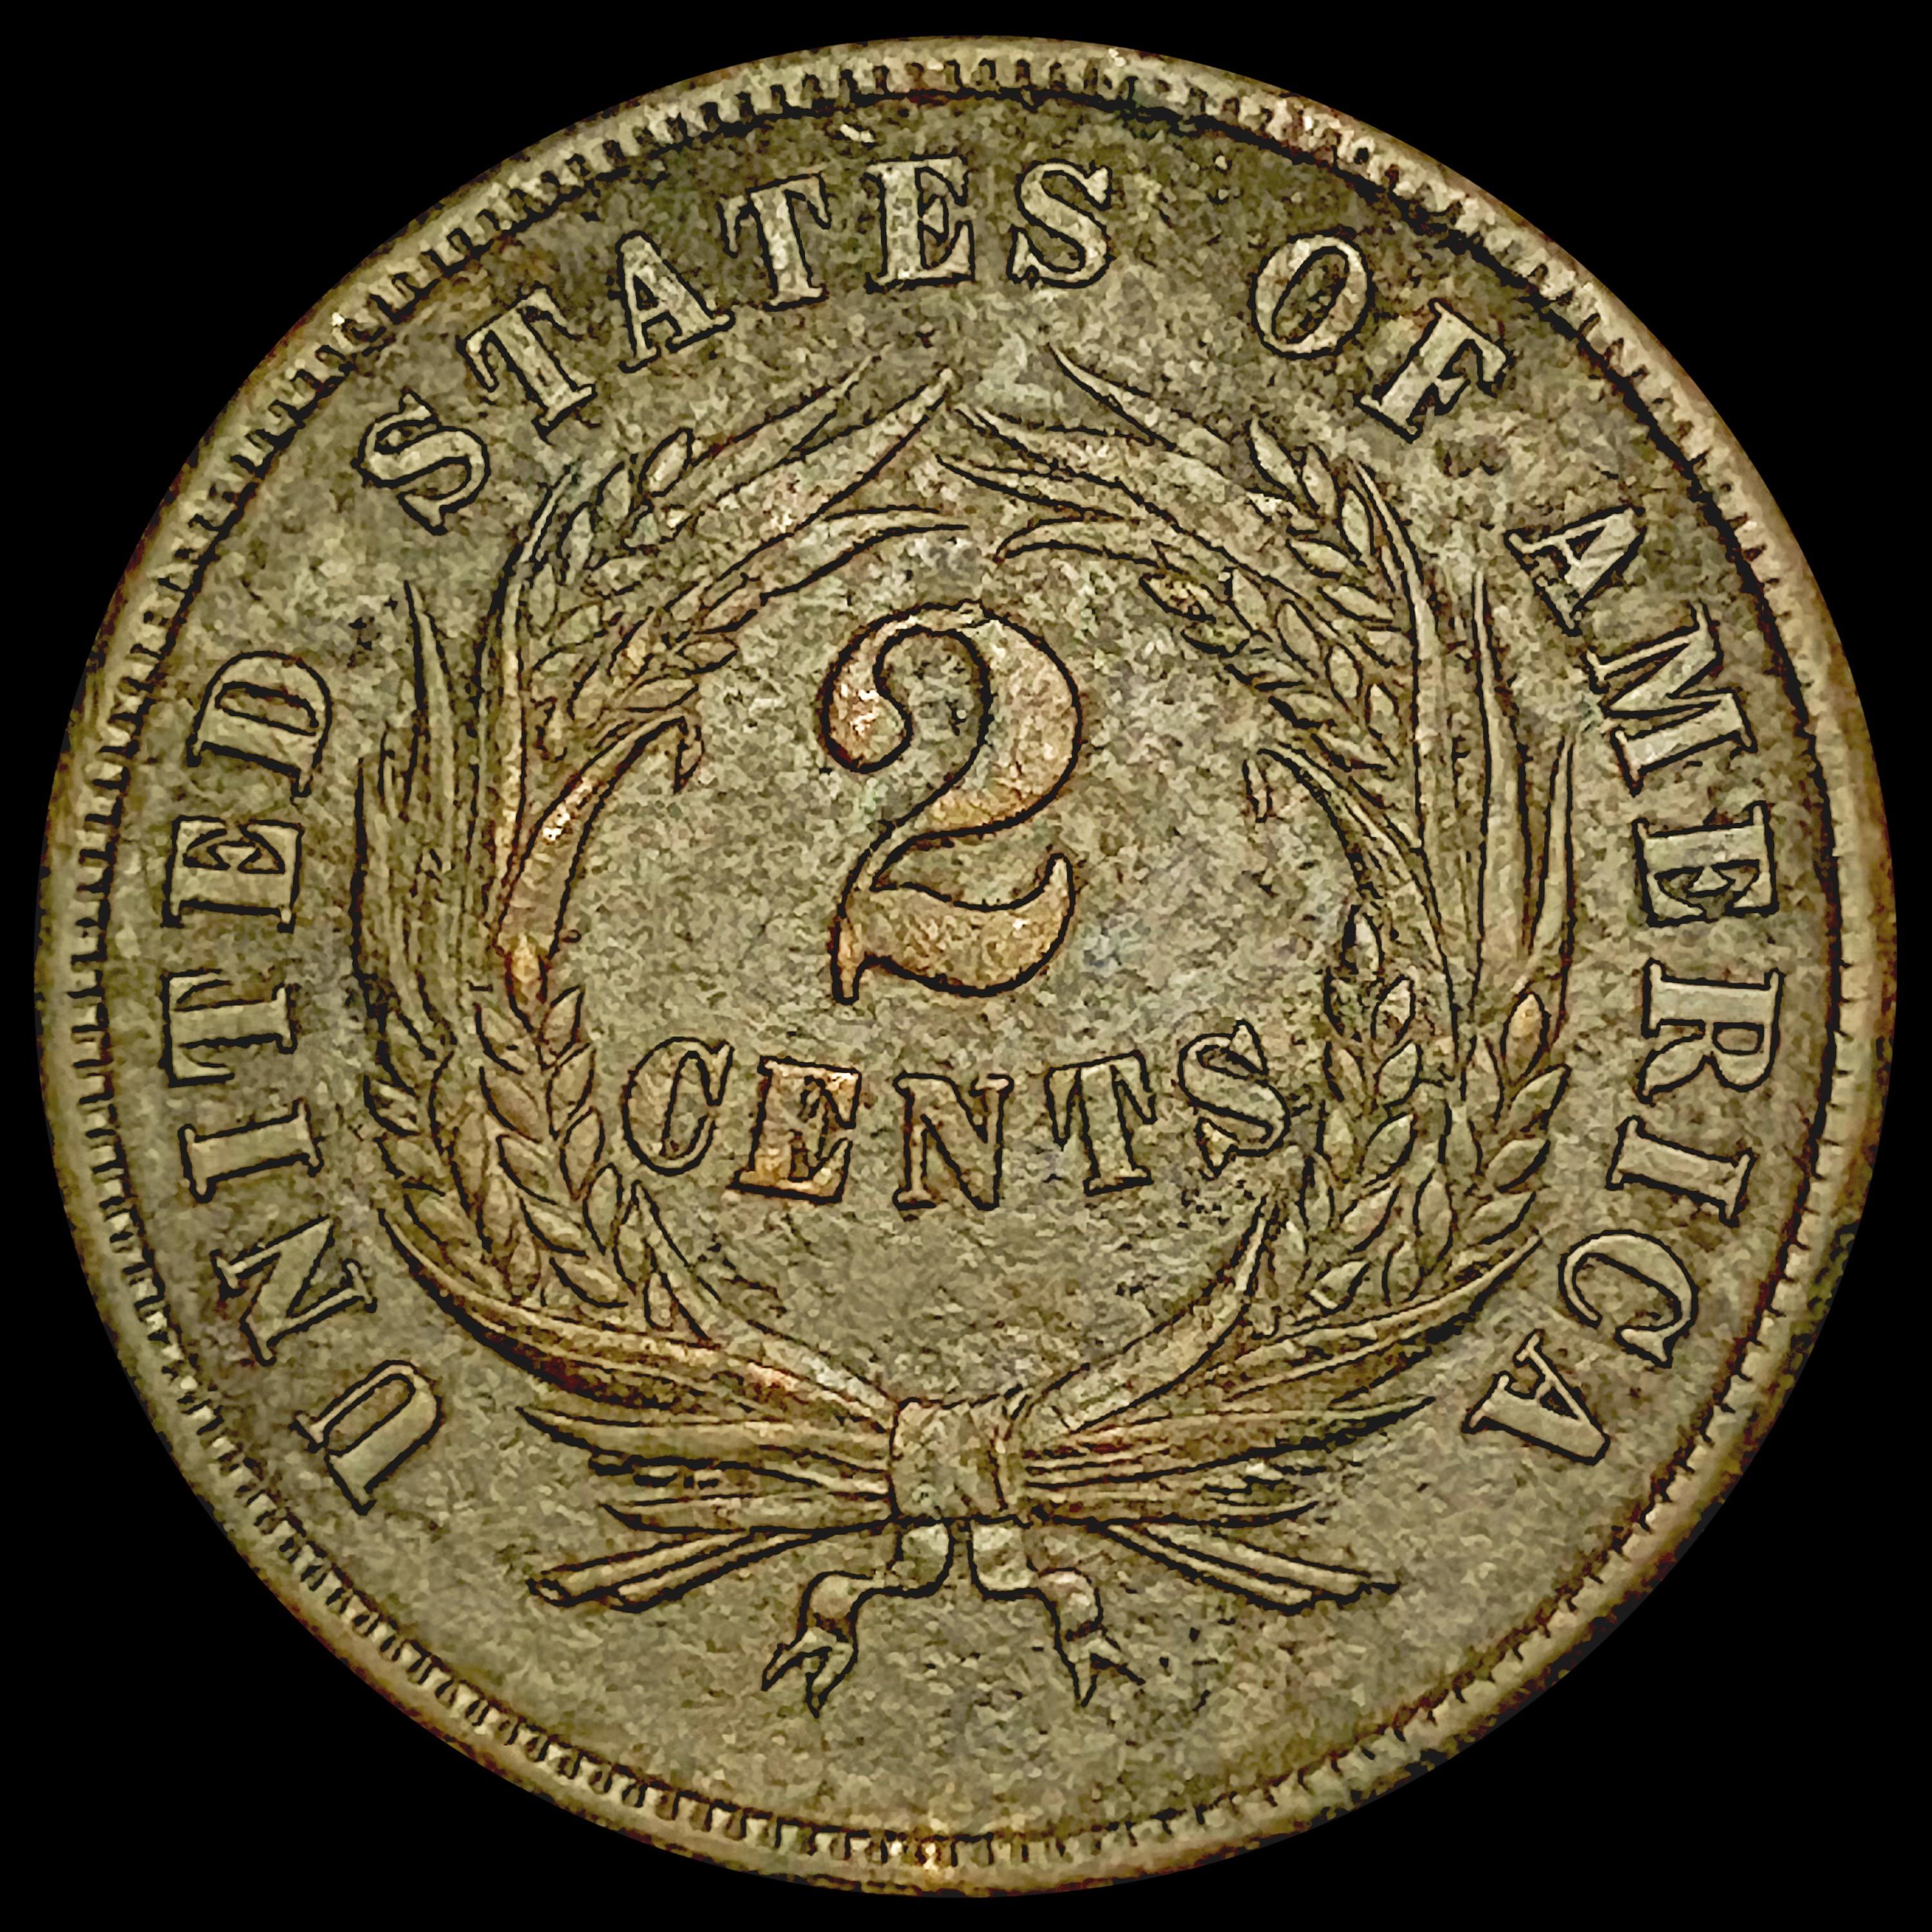 1864 Two Cent Piece NEARLY UNCIRCULATED